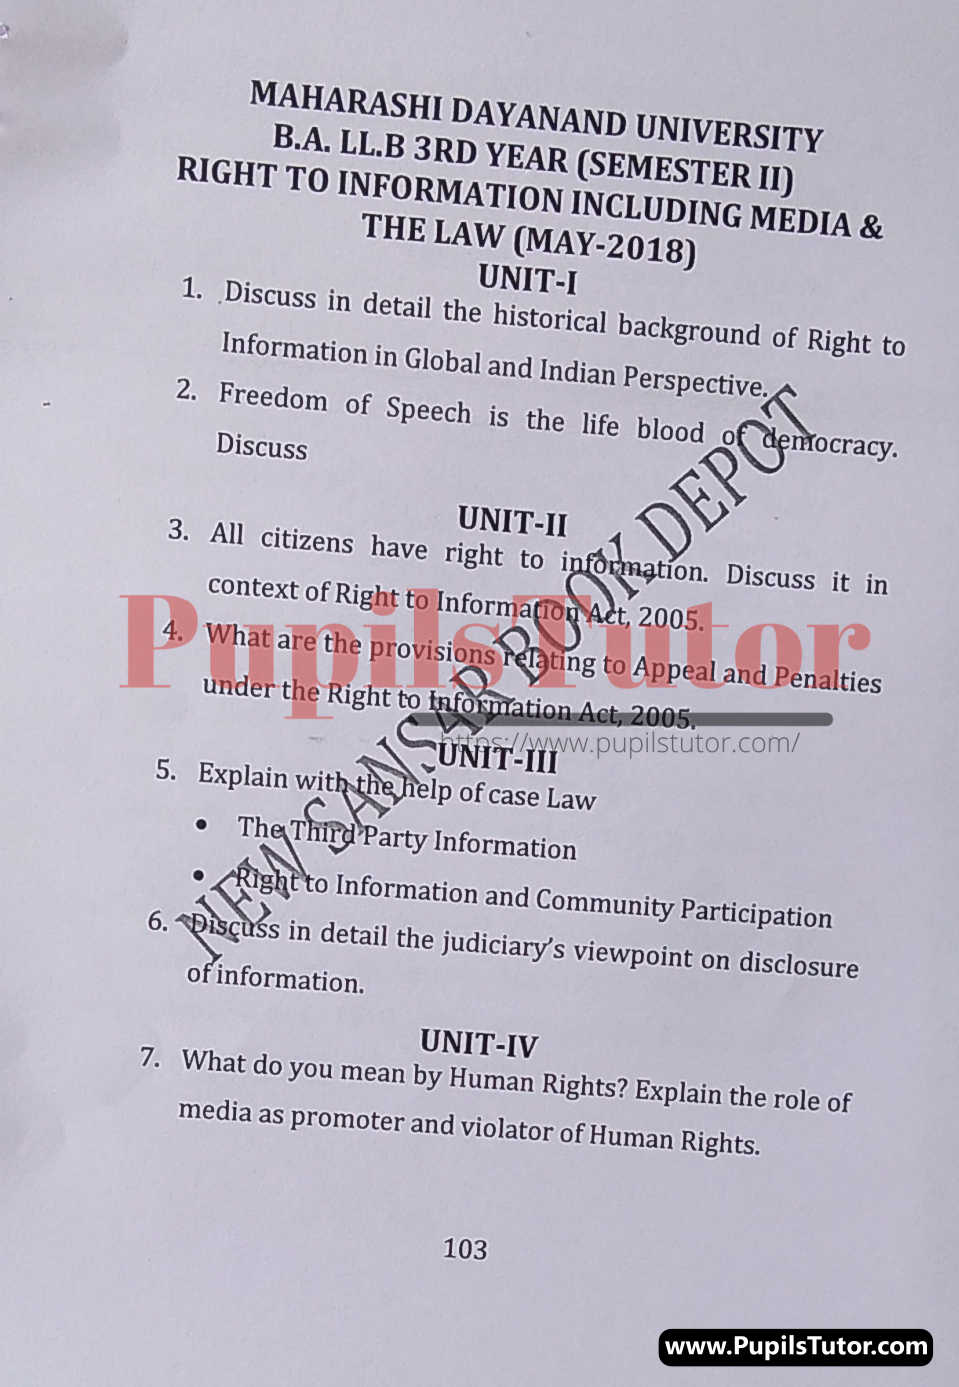 MDU (Maharshi Dayanand University, Rohtak Haryana) LLB Regular Exam (Hons.) Second Semester Previous Year Right To Information Including Media And The Law Question Paper For May, 2018 Exam (Question Paper Page 1) - pupilstutor.com